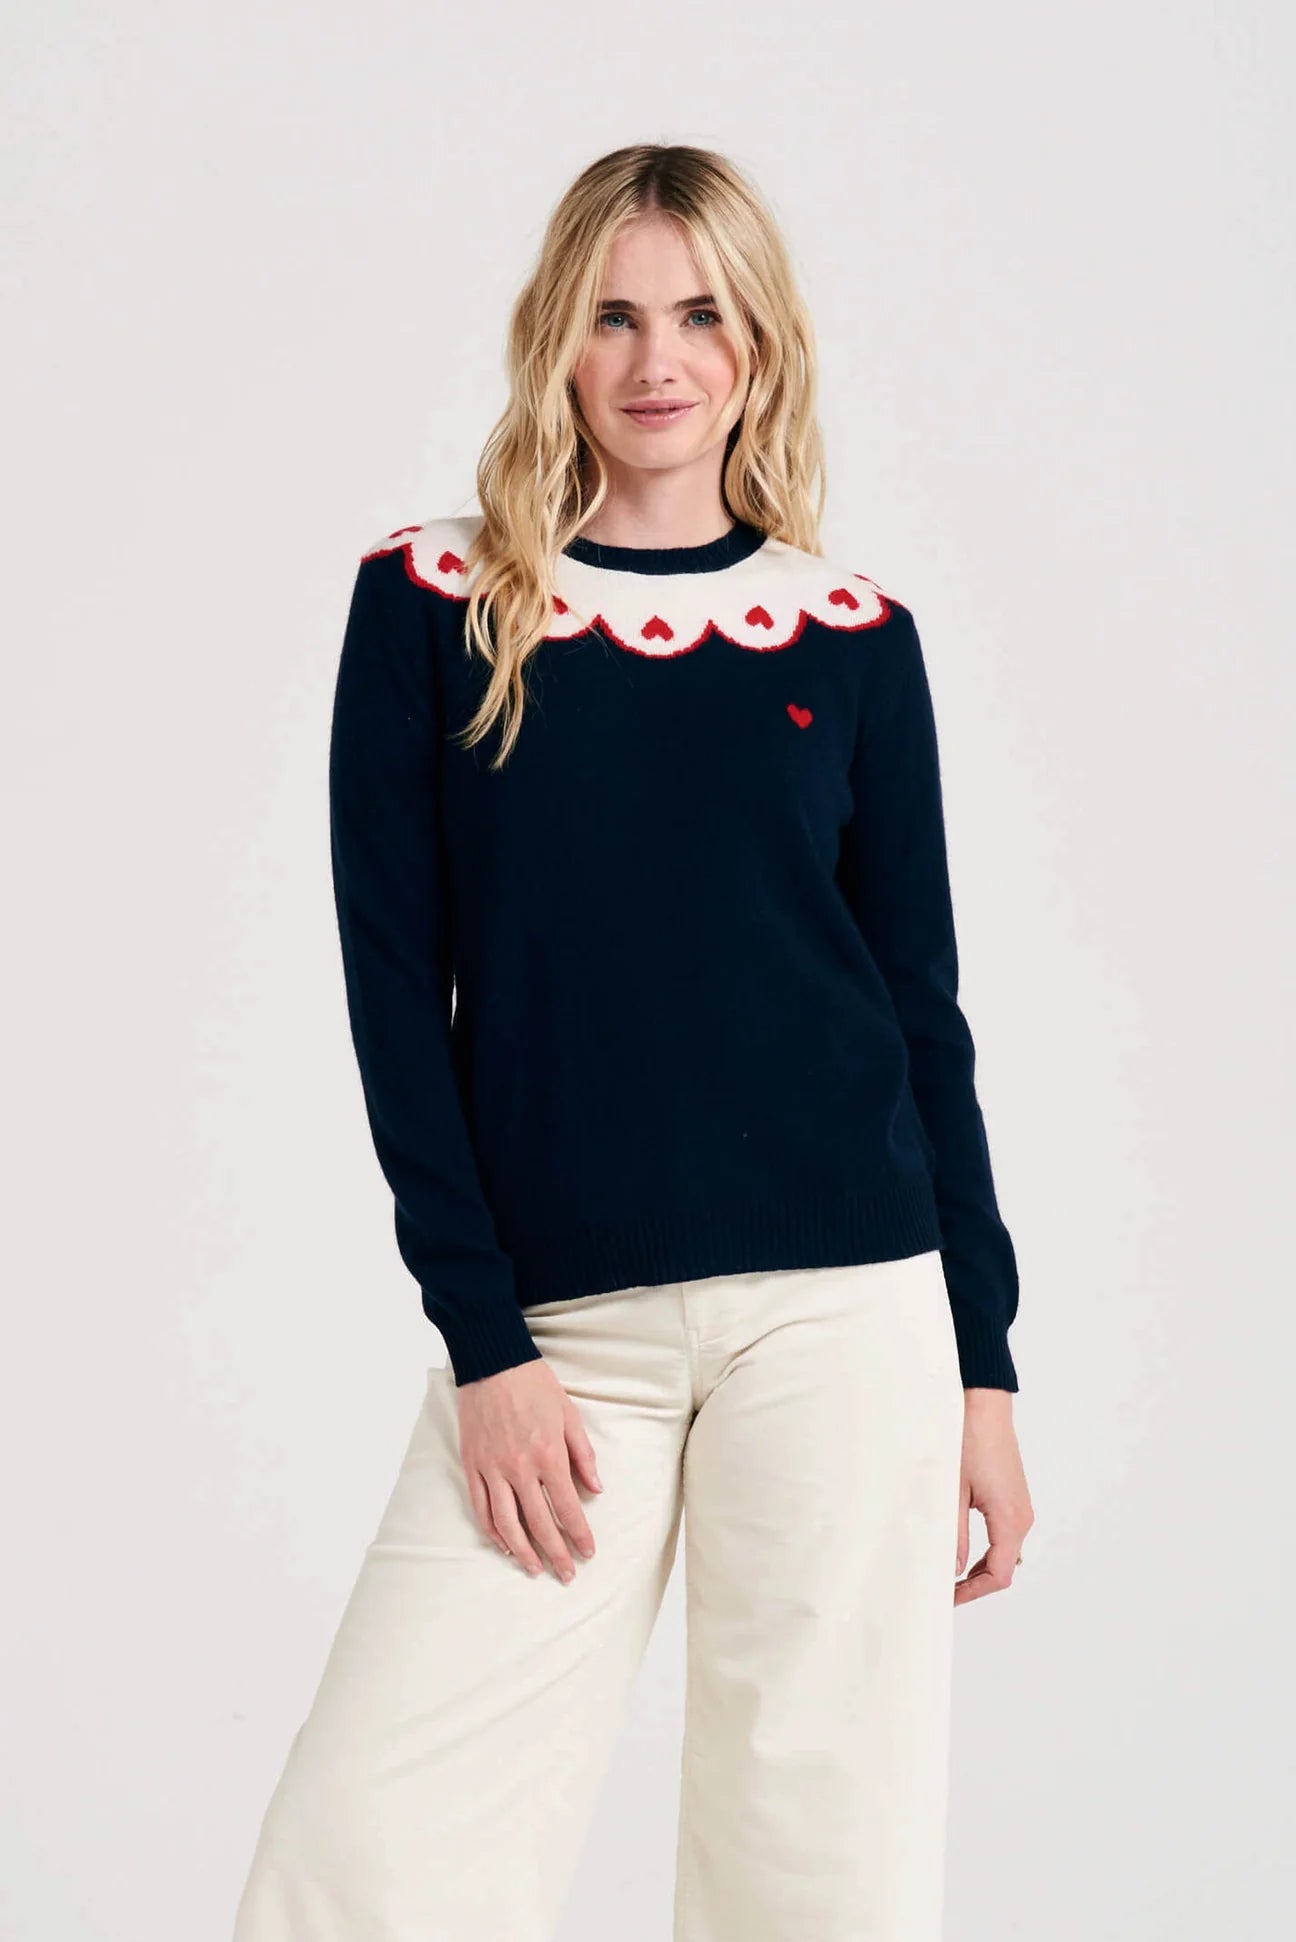 Hearty Cashmere Crew in Navy by Jumper 1234